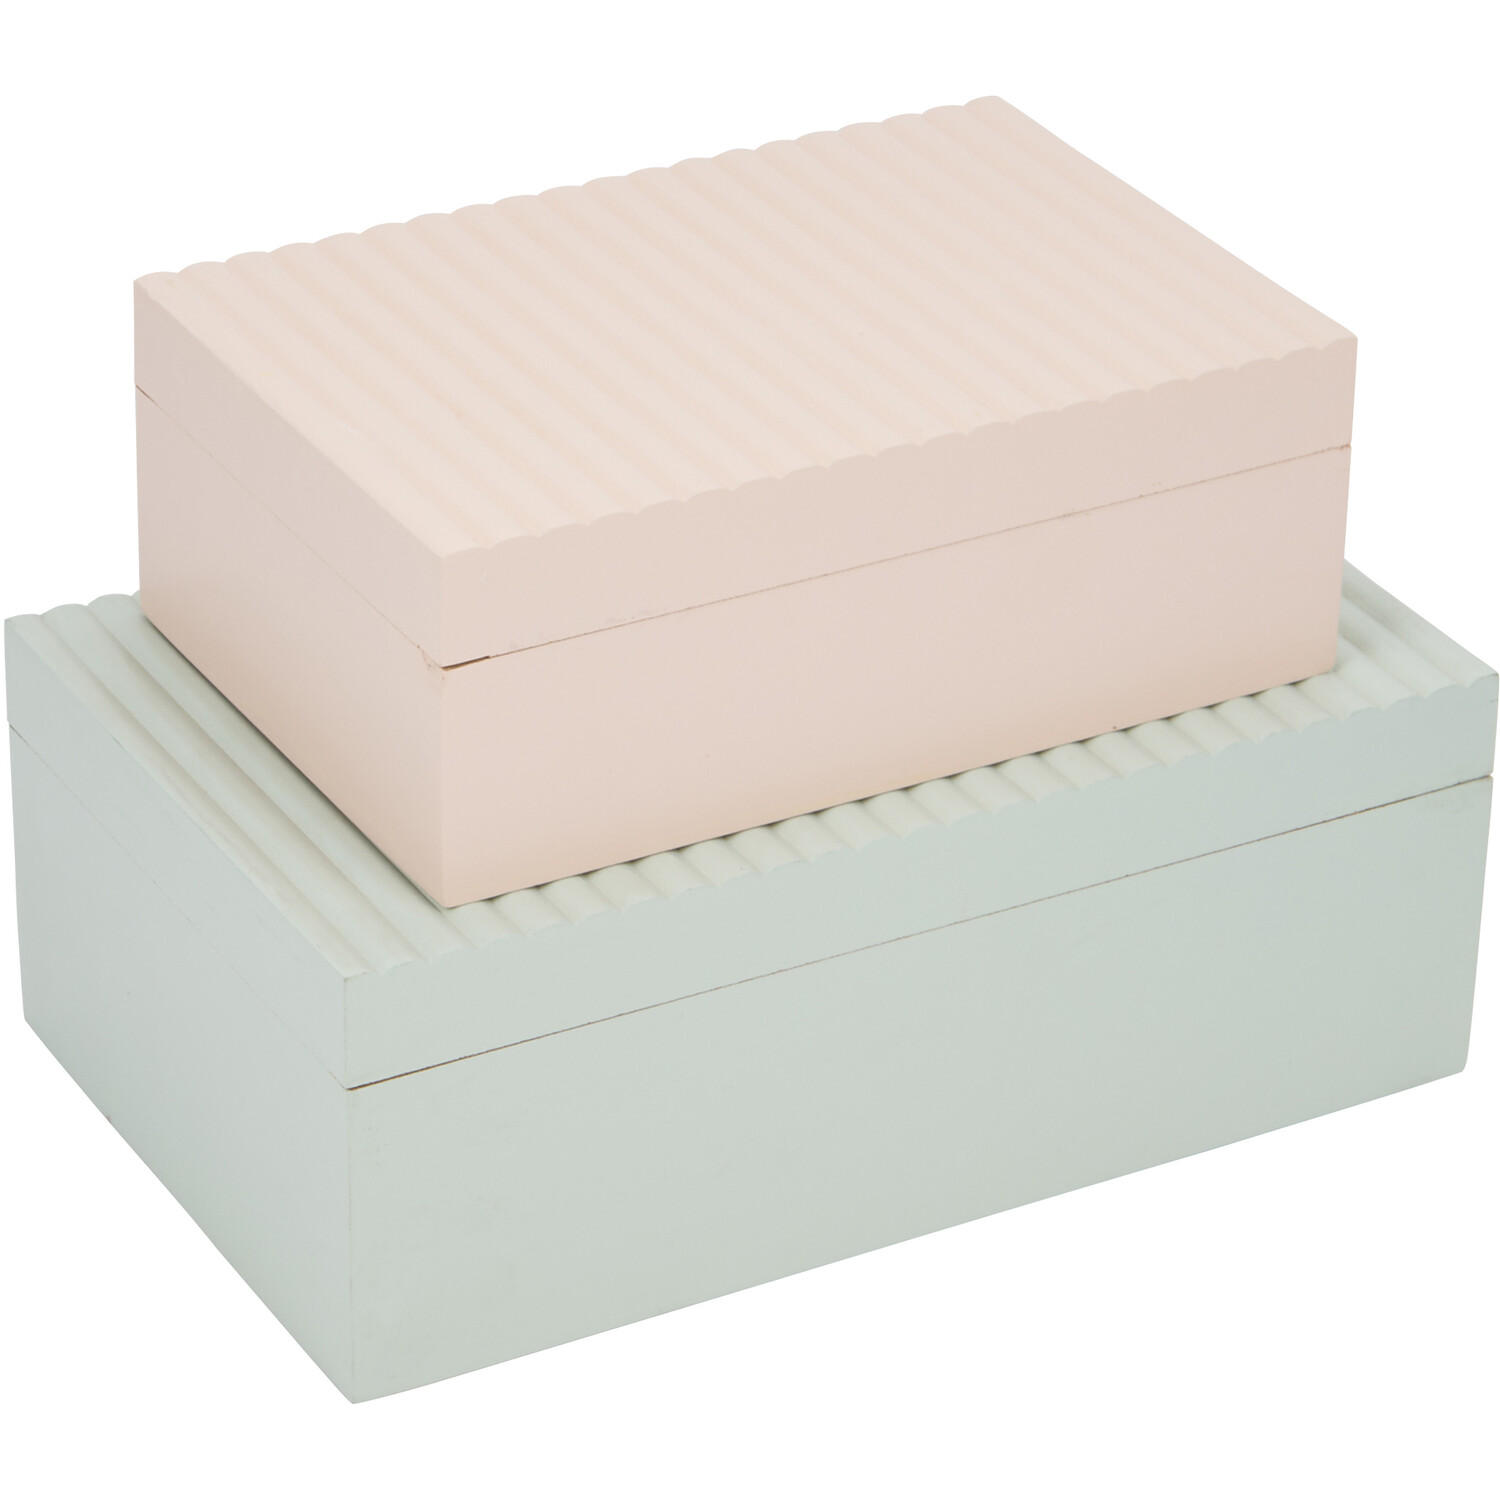 Set of 2 Nora Wooden Boxes Image 1